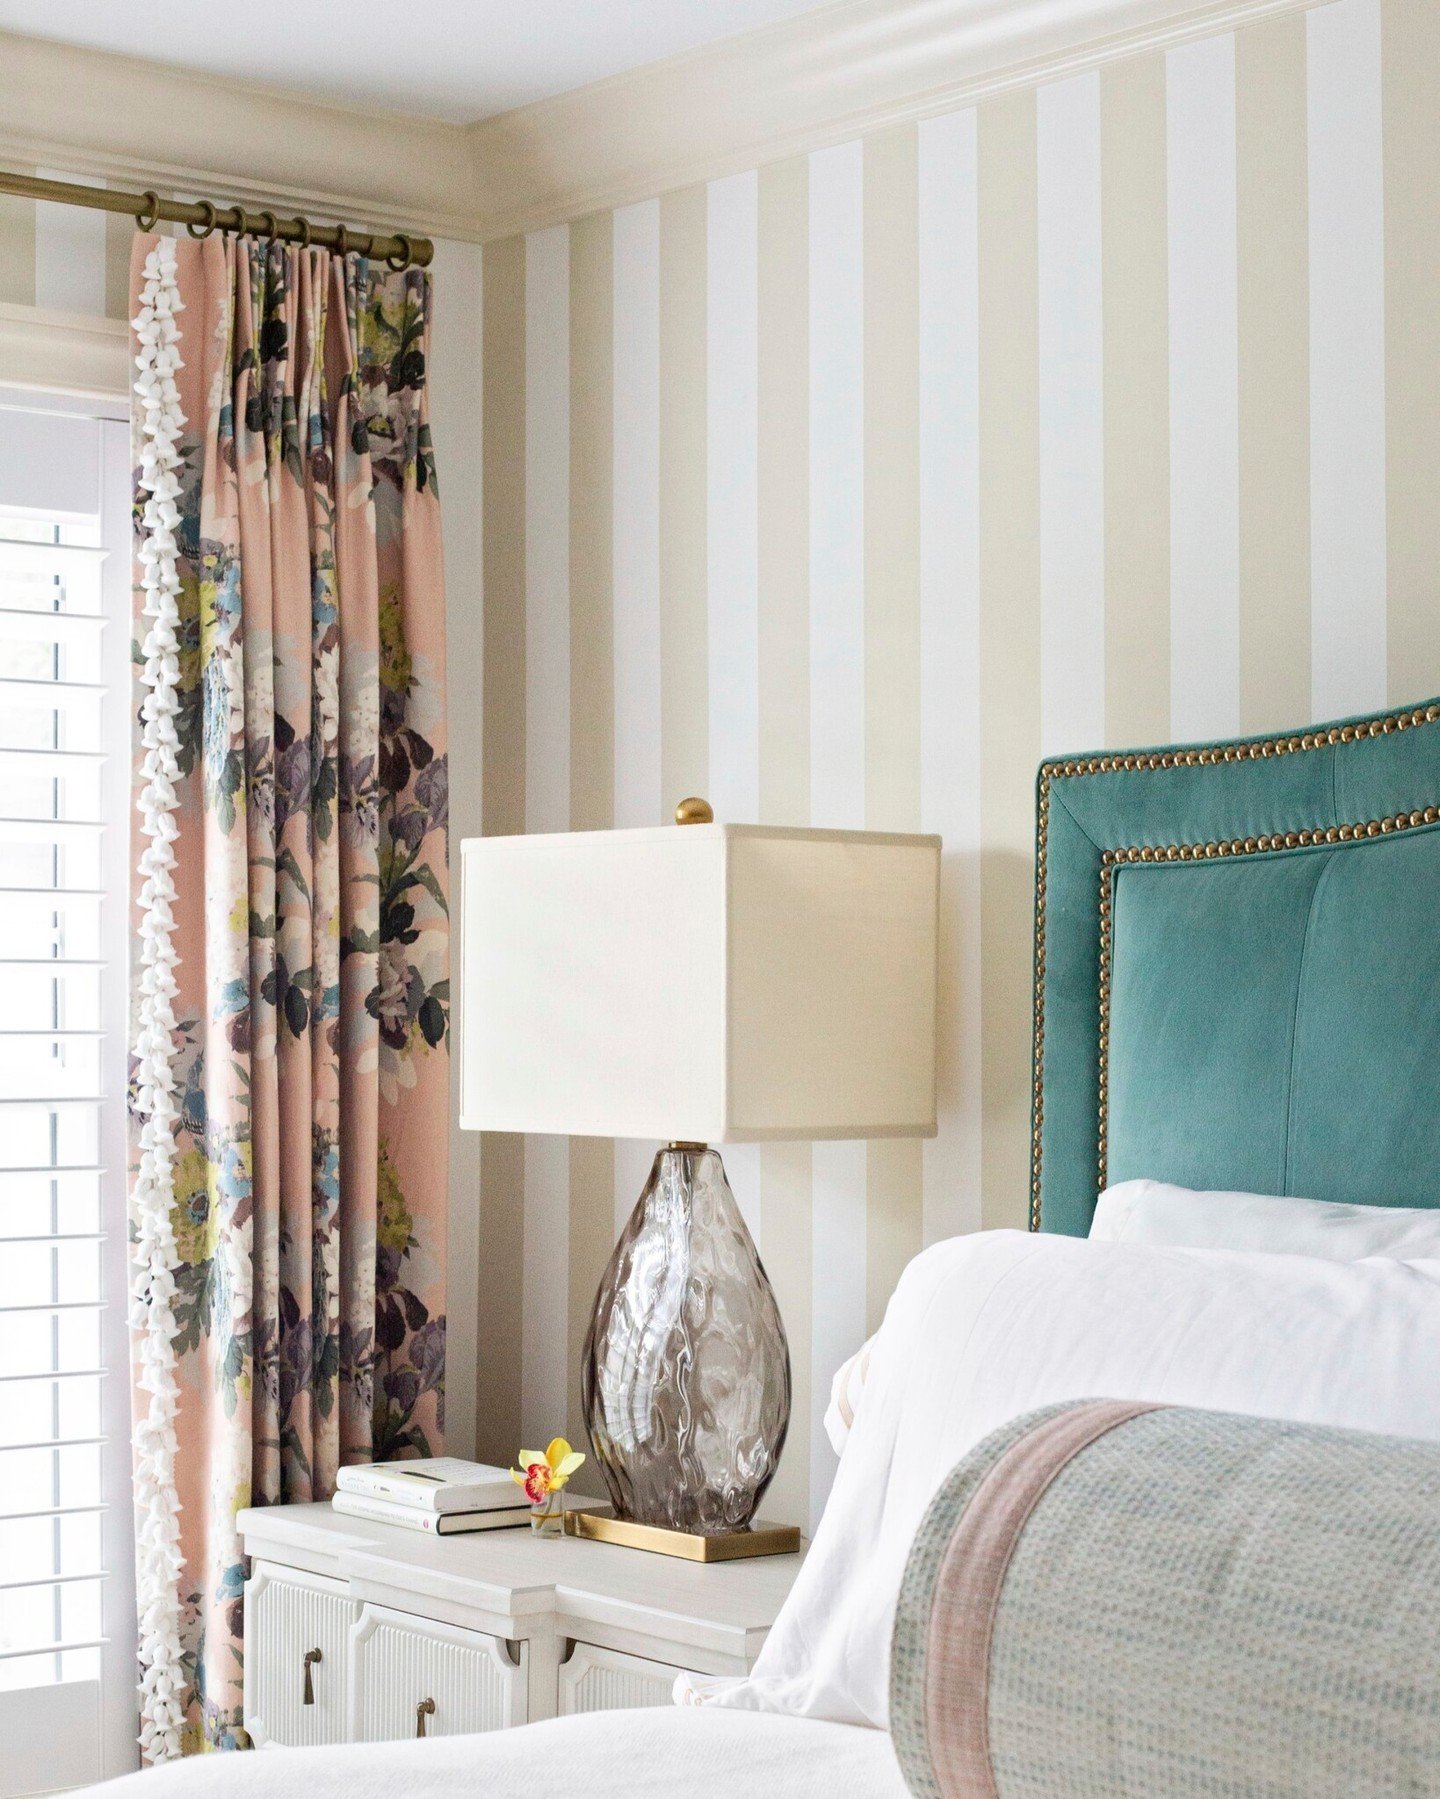 We took our stripes bold for this eclectic-meets-traditional primary bedroom 💛 

With custom drapery that boasted a more busy pattern, we wanted something that provided a nice contrast without being overwhelming on the eyes. Enter: thick stripes wit